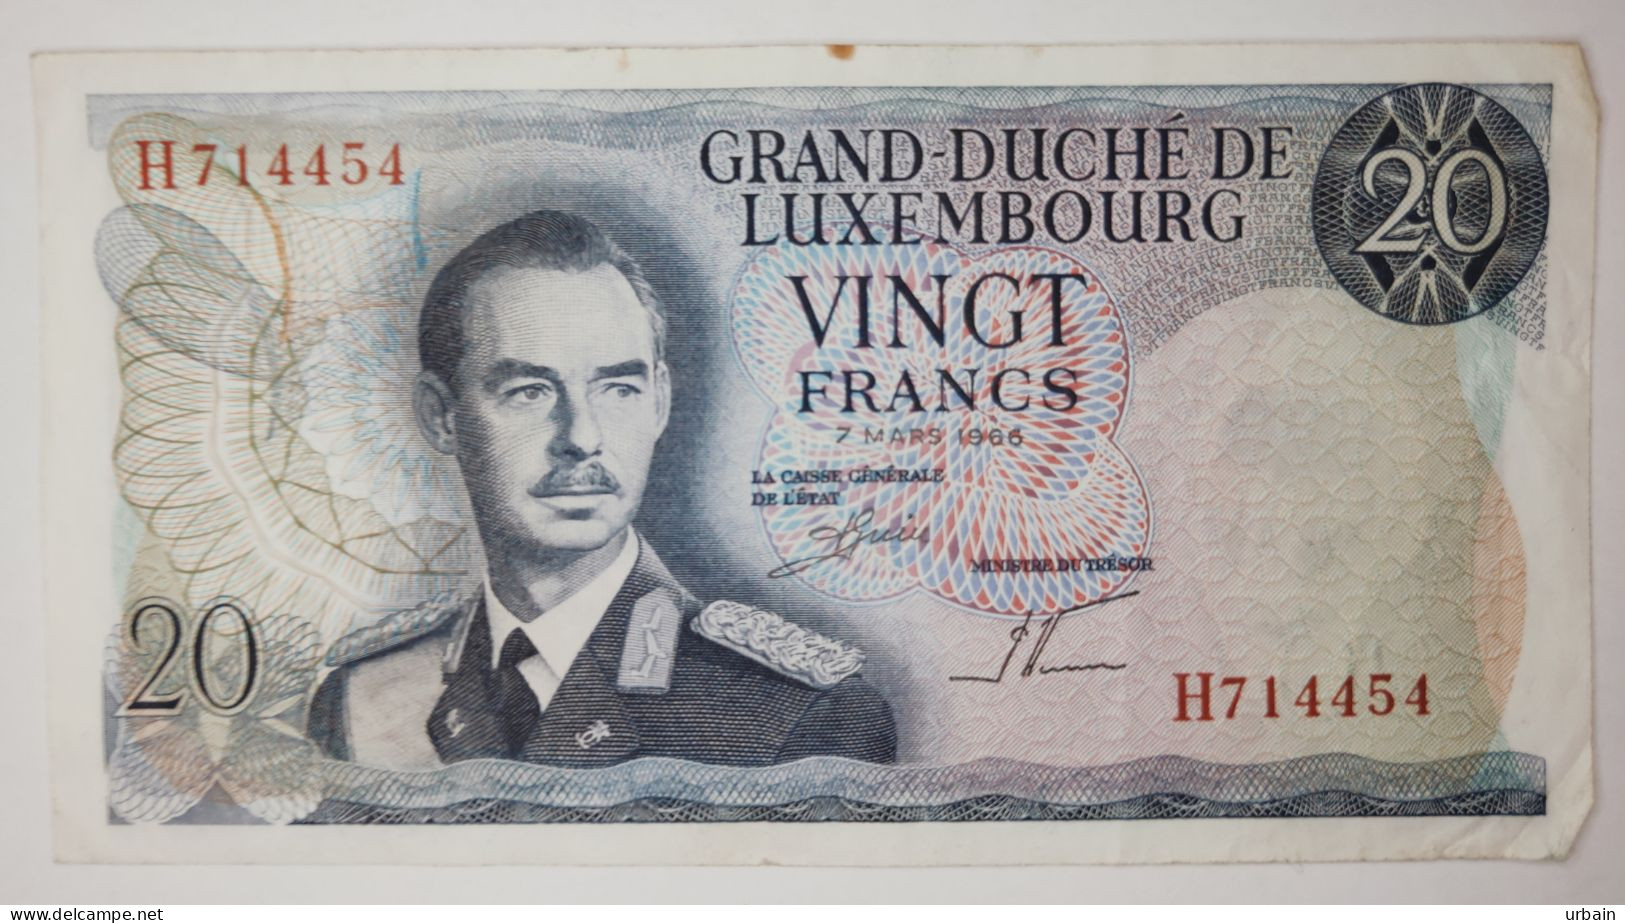 Batch Of 5 Banknotes - Luxembourg - 20 Francs - 7 Mars 1966 - Luxemburg